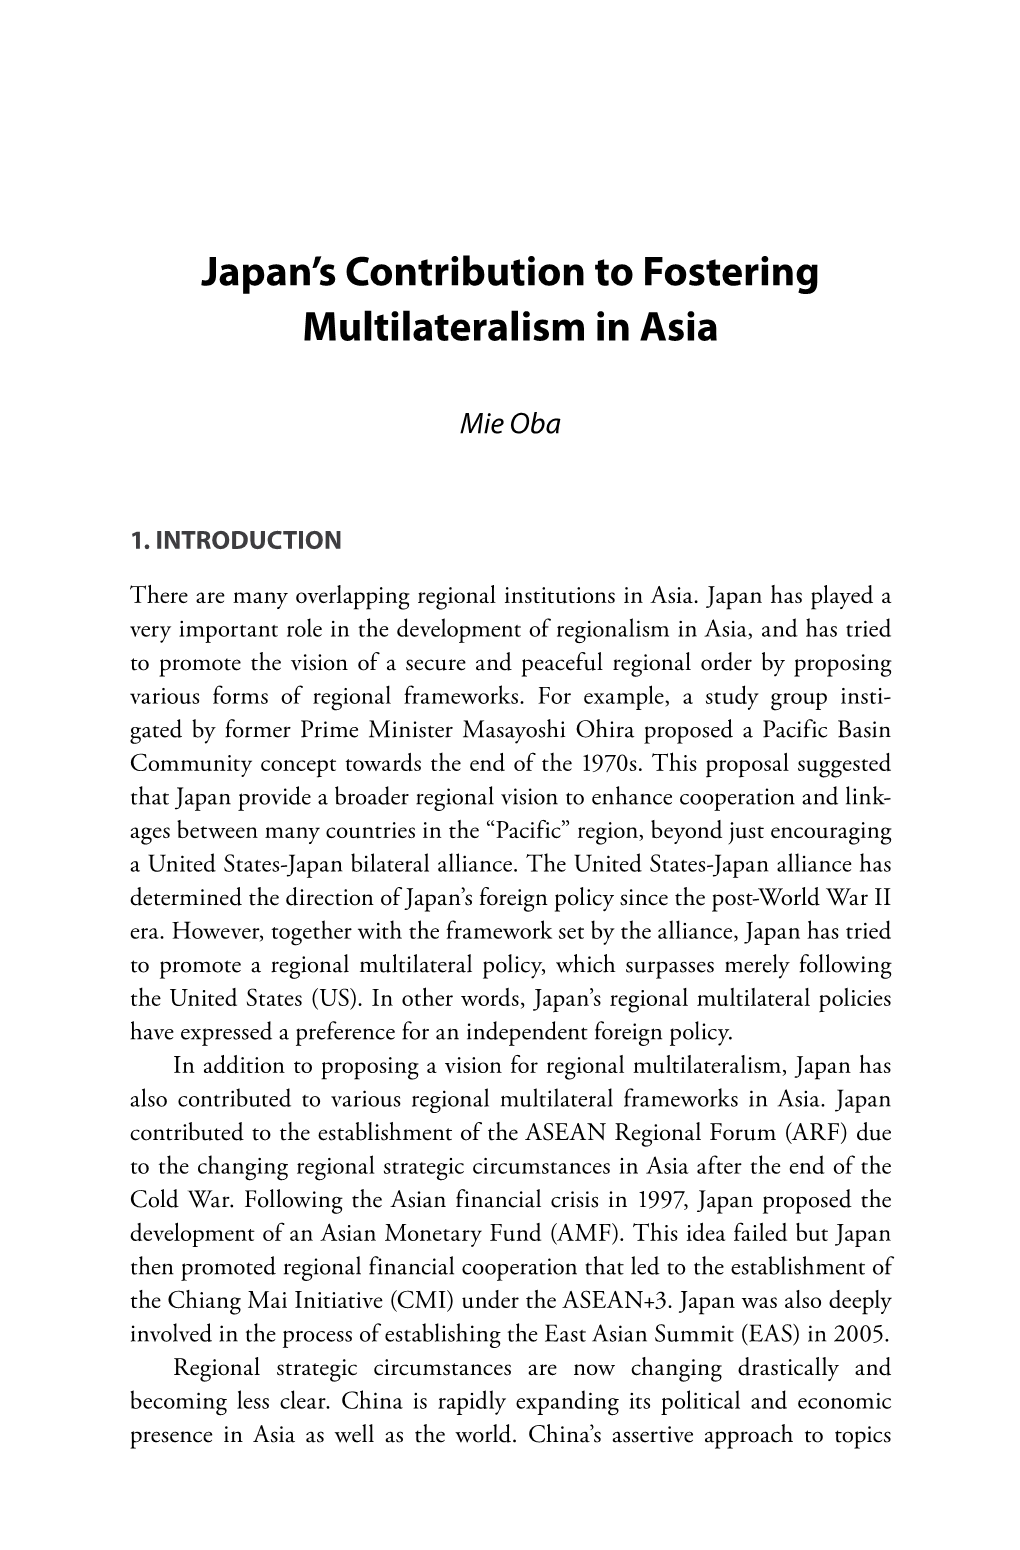 Japan's Contribution to Fostering Multilateralism in Asia